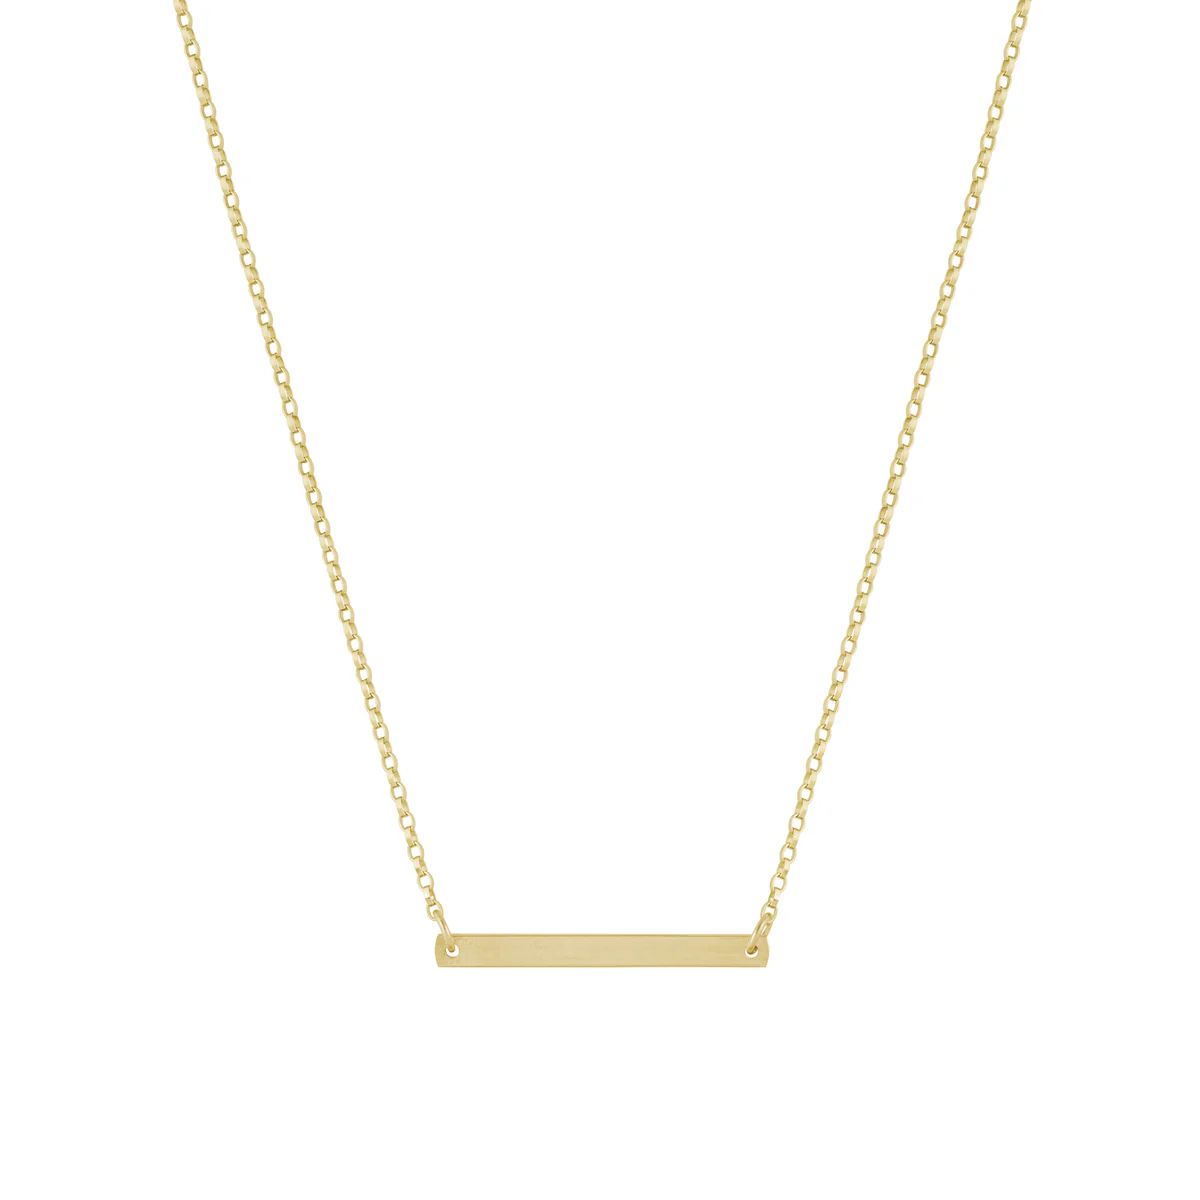 Line up Necklace | Electric Picks Jewelry